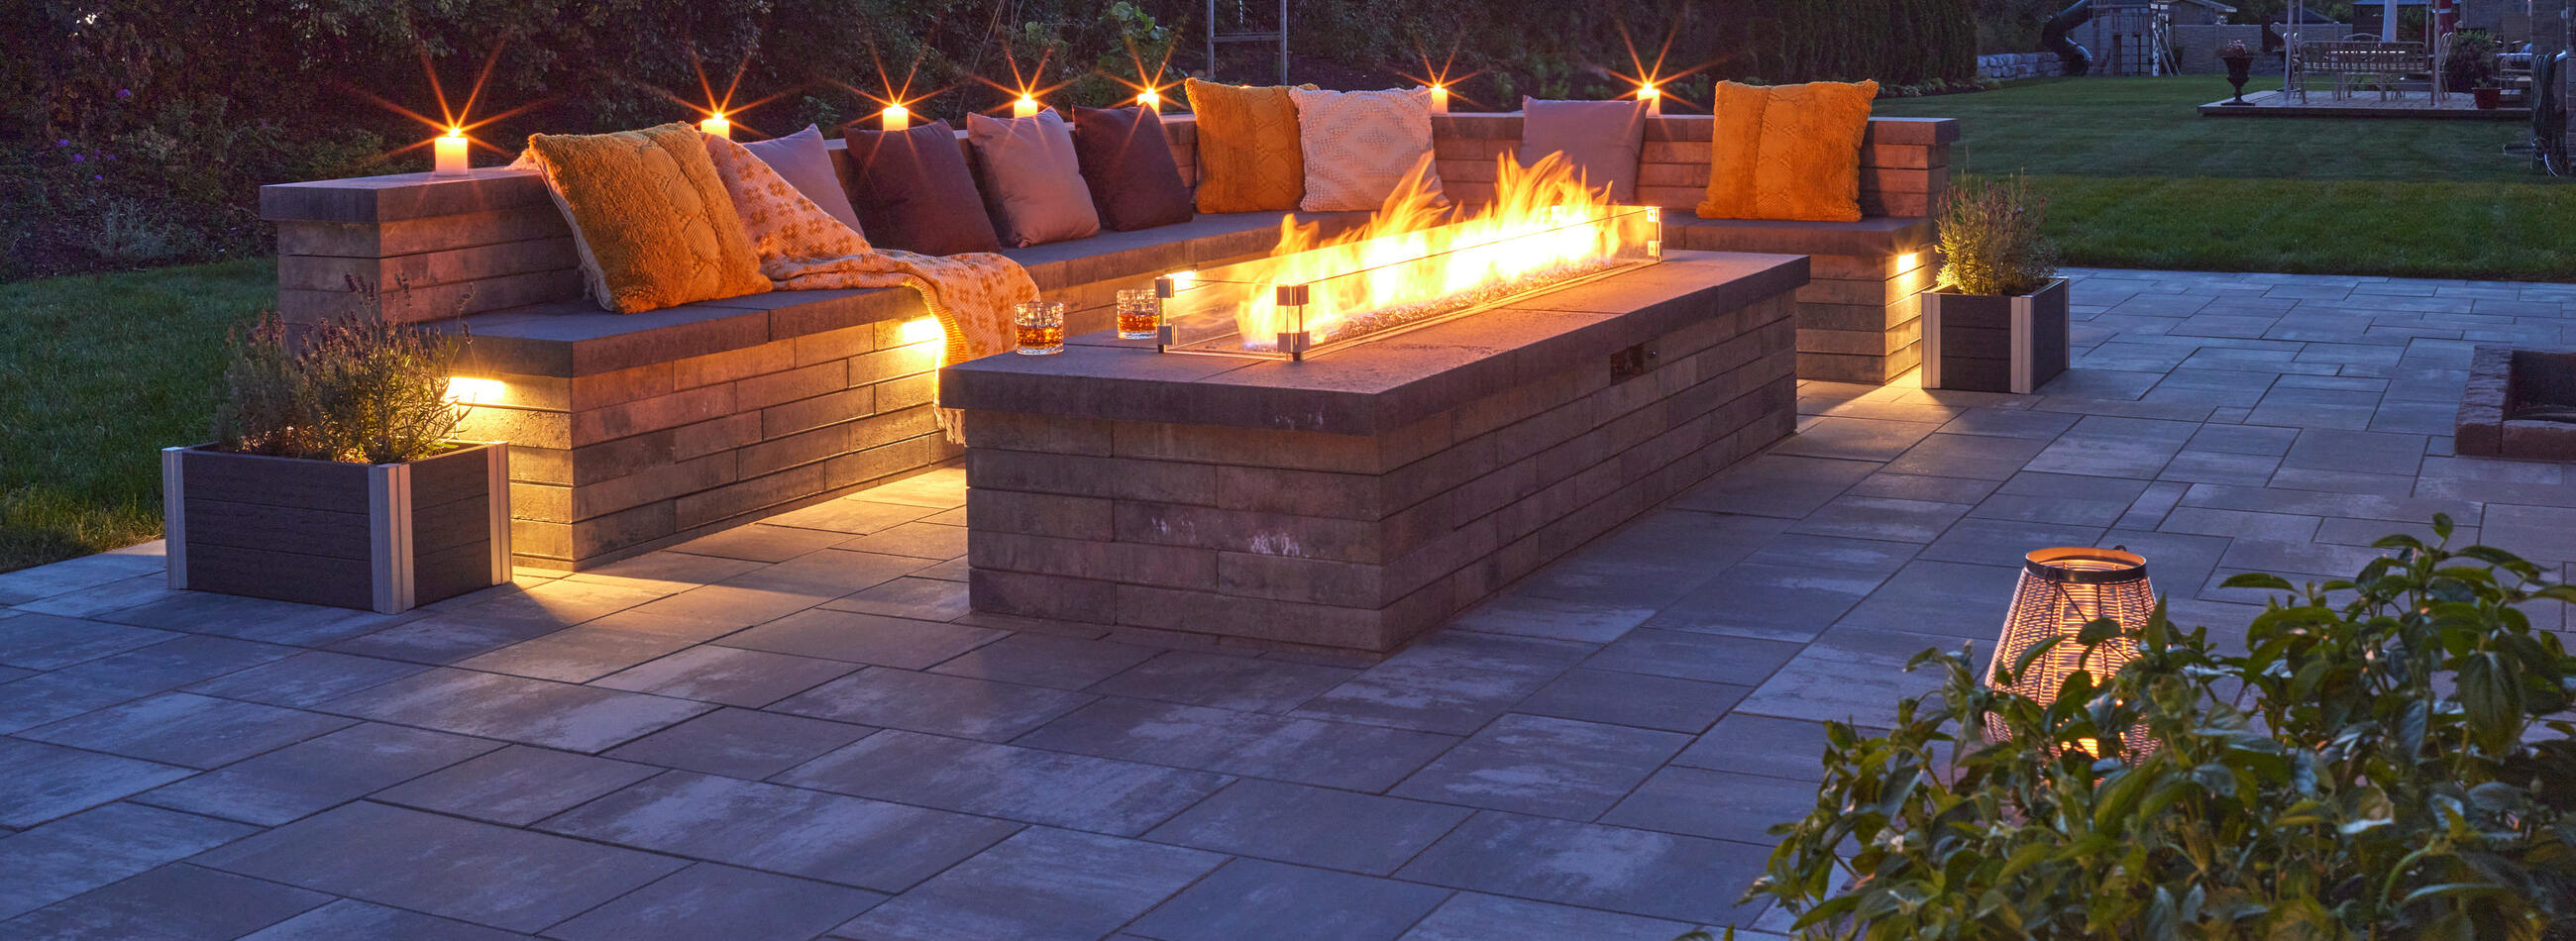 Nueva 75 Wall and Molina slab products by Oaks Landscape Products